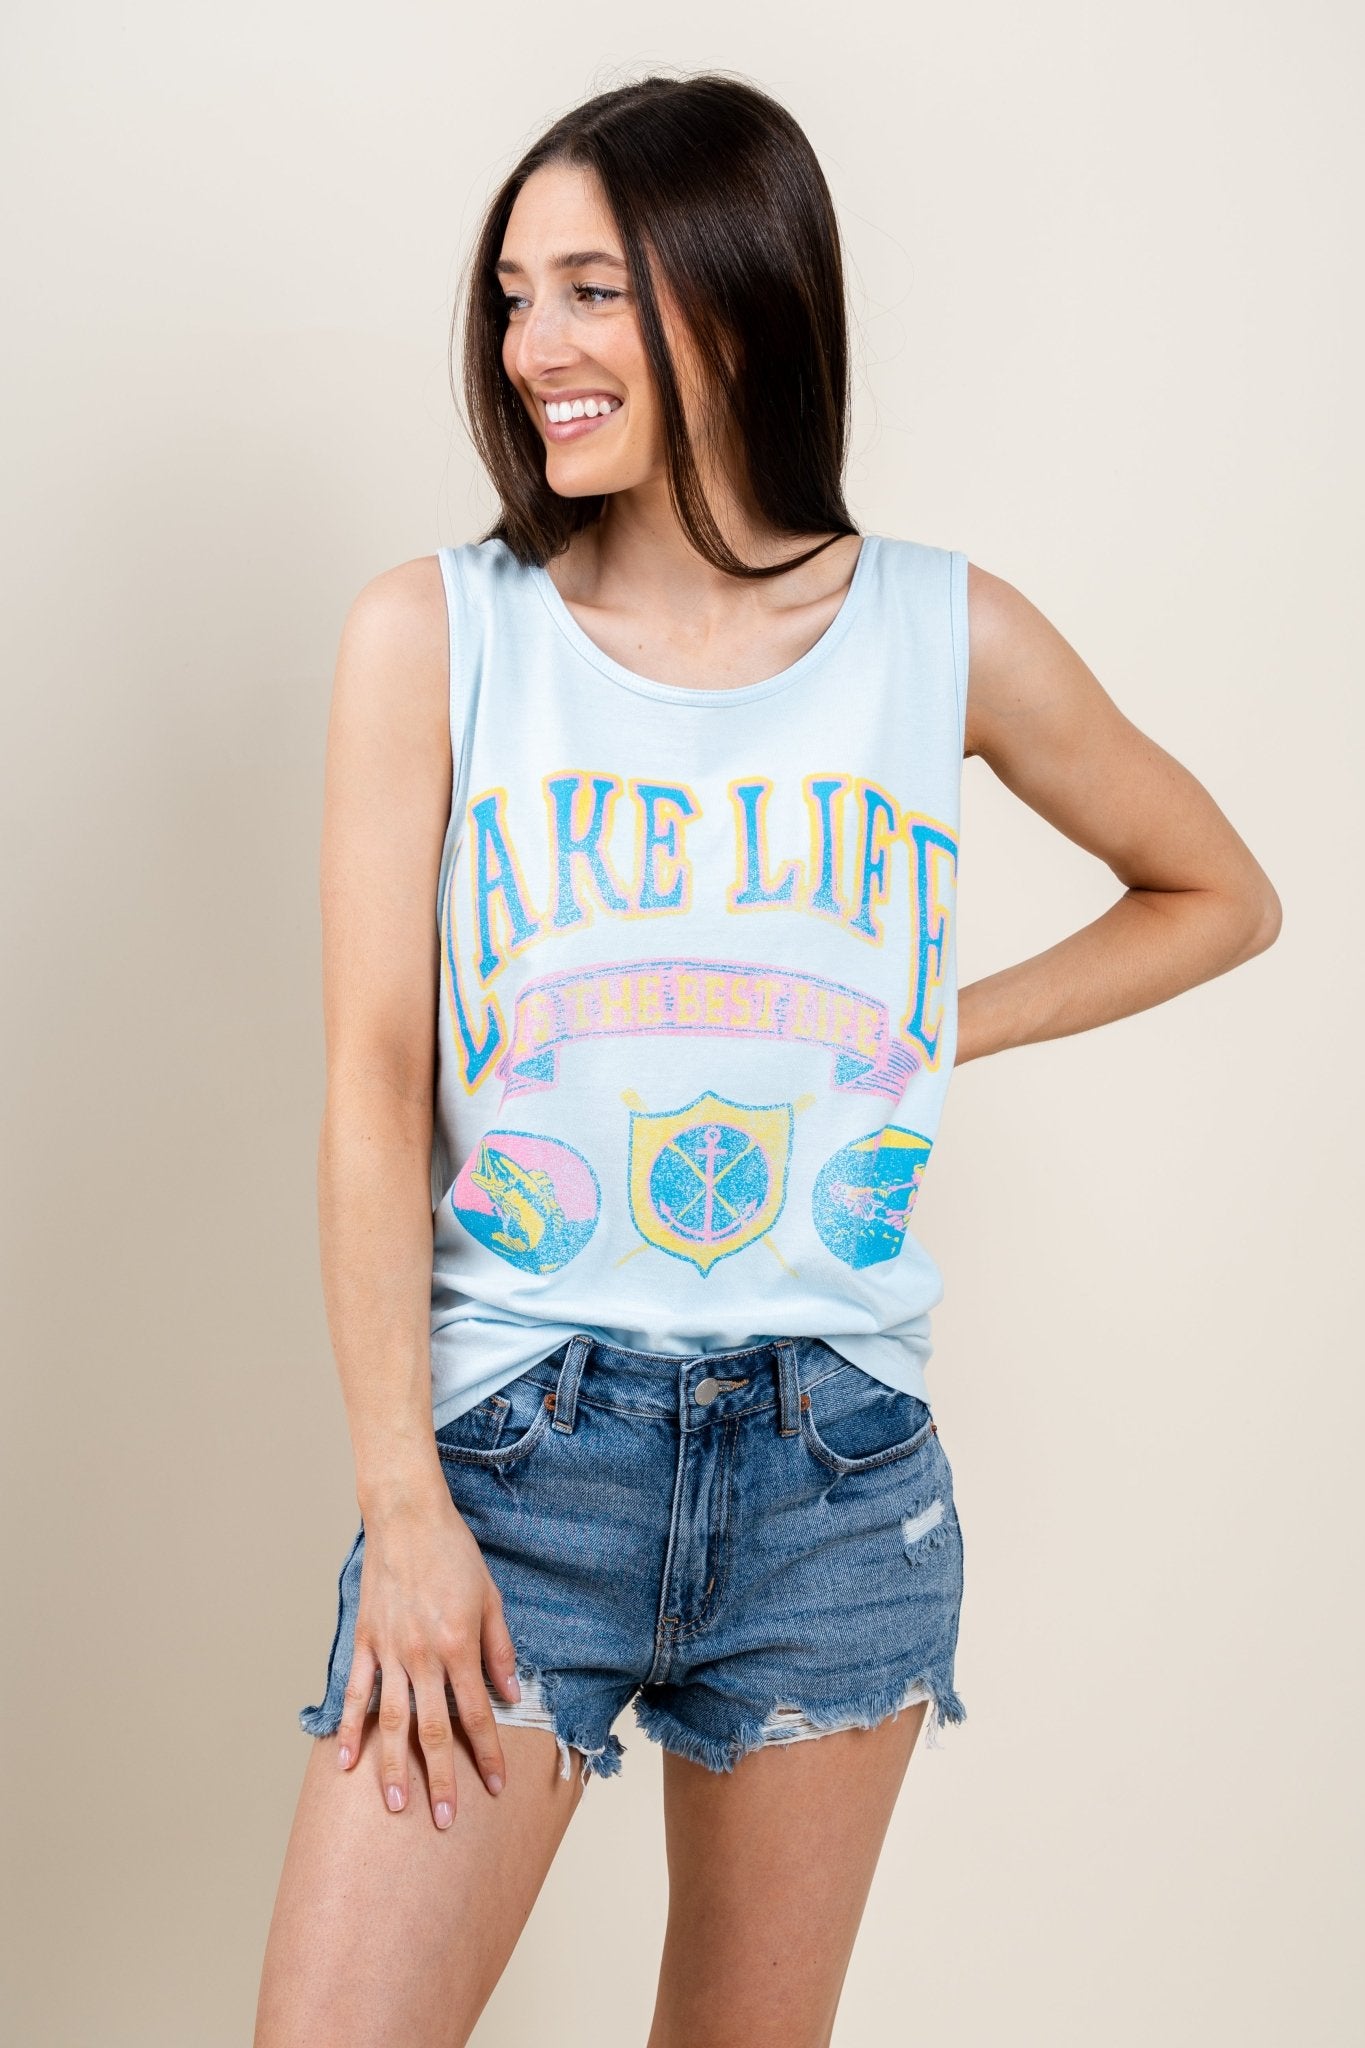 Lake life patch comfort wash tank top baby blue - DayDreamer Rock T-Shirts at Lush Fashion Lounge Trendy Boutique in Oklahoma City